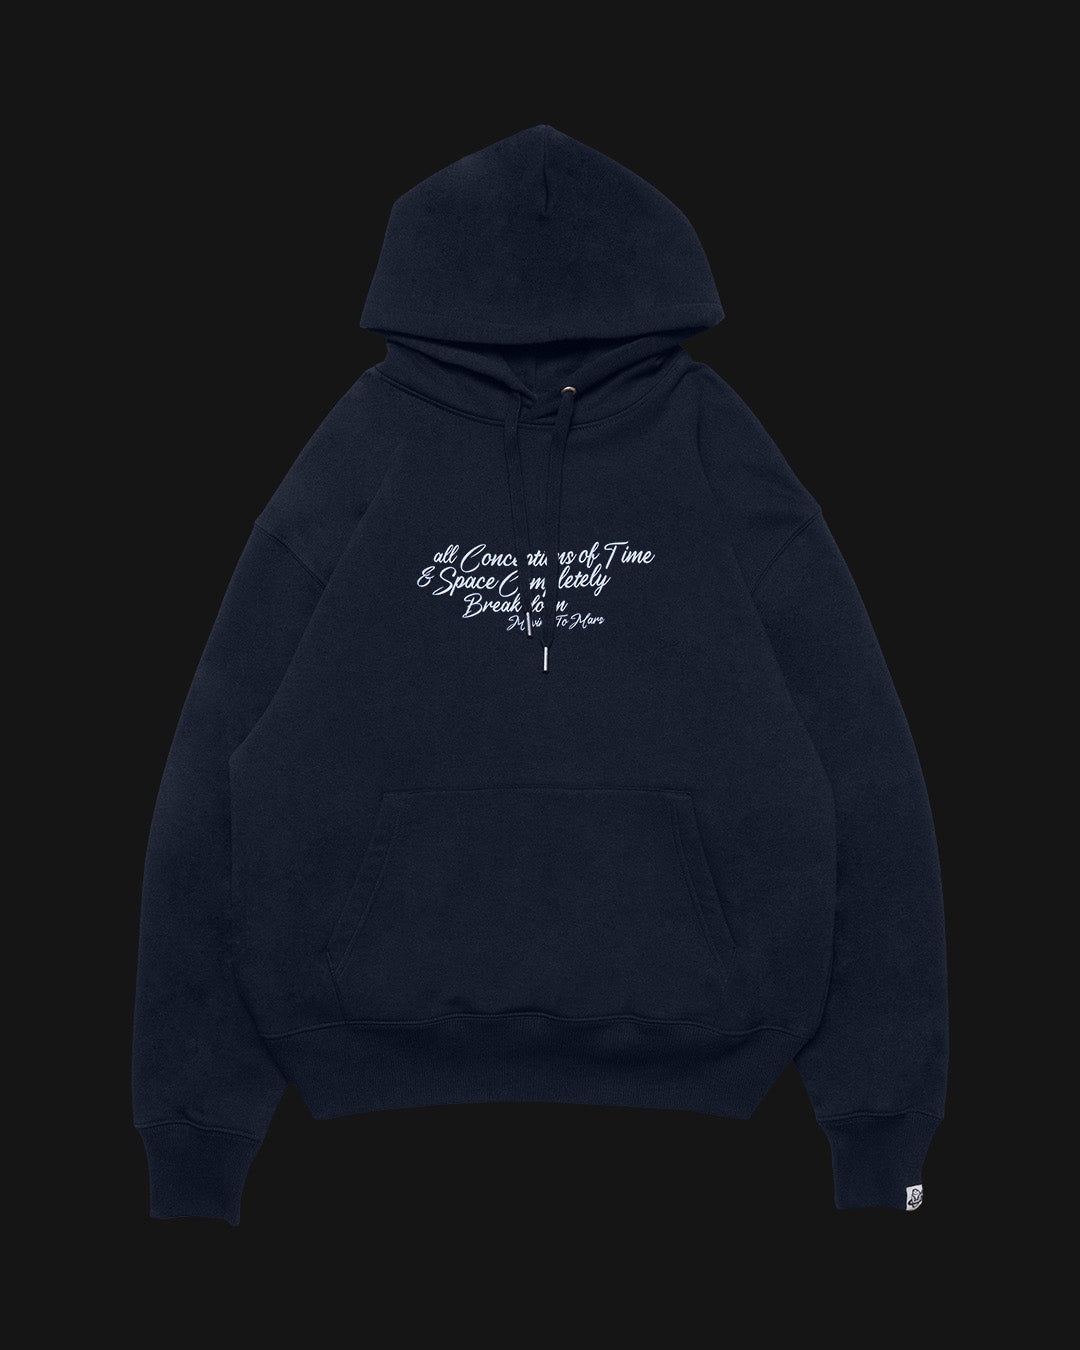 All Conceptions Hoodie